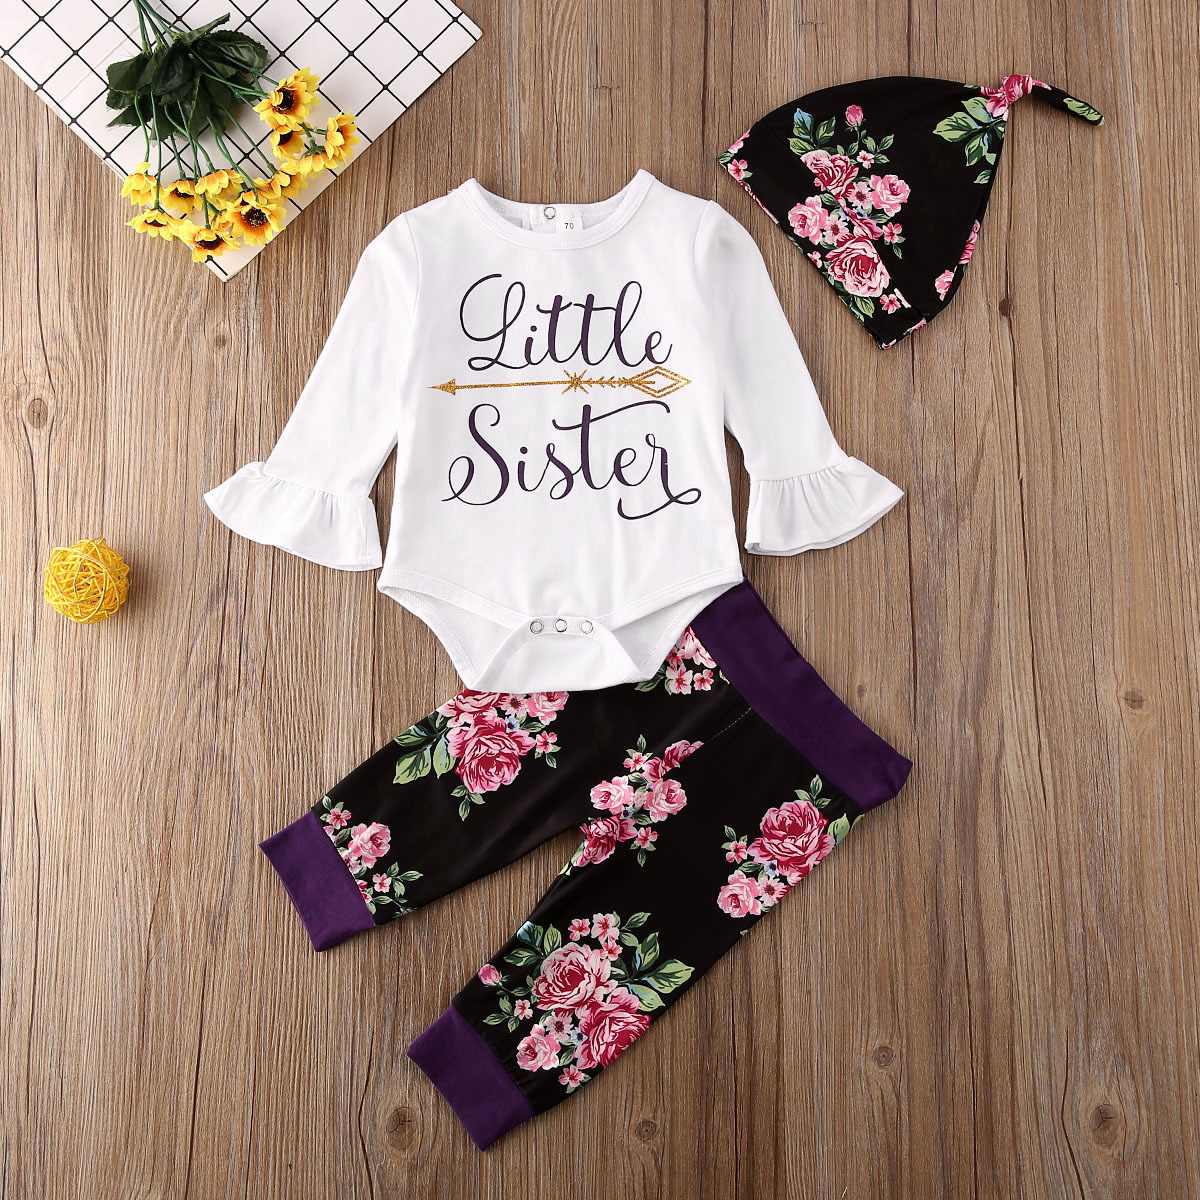 A Piece Of Hair For Small And Medium Girls Spring And Autumn Letters Long-sleeved Tops, Flower Trousers, Hairbands, Three-piece Sets Of Sisters And Children's Suits